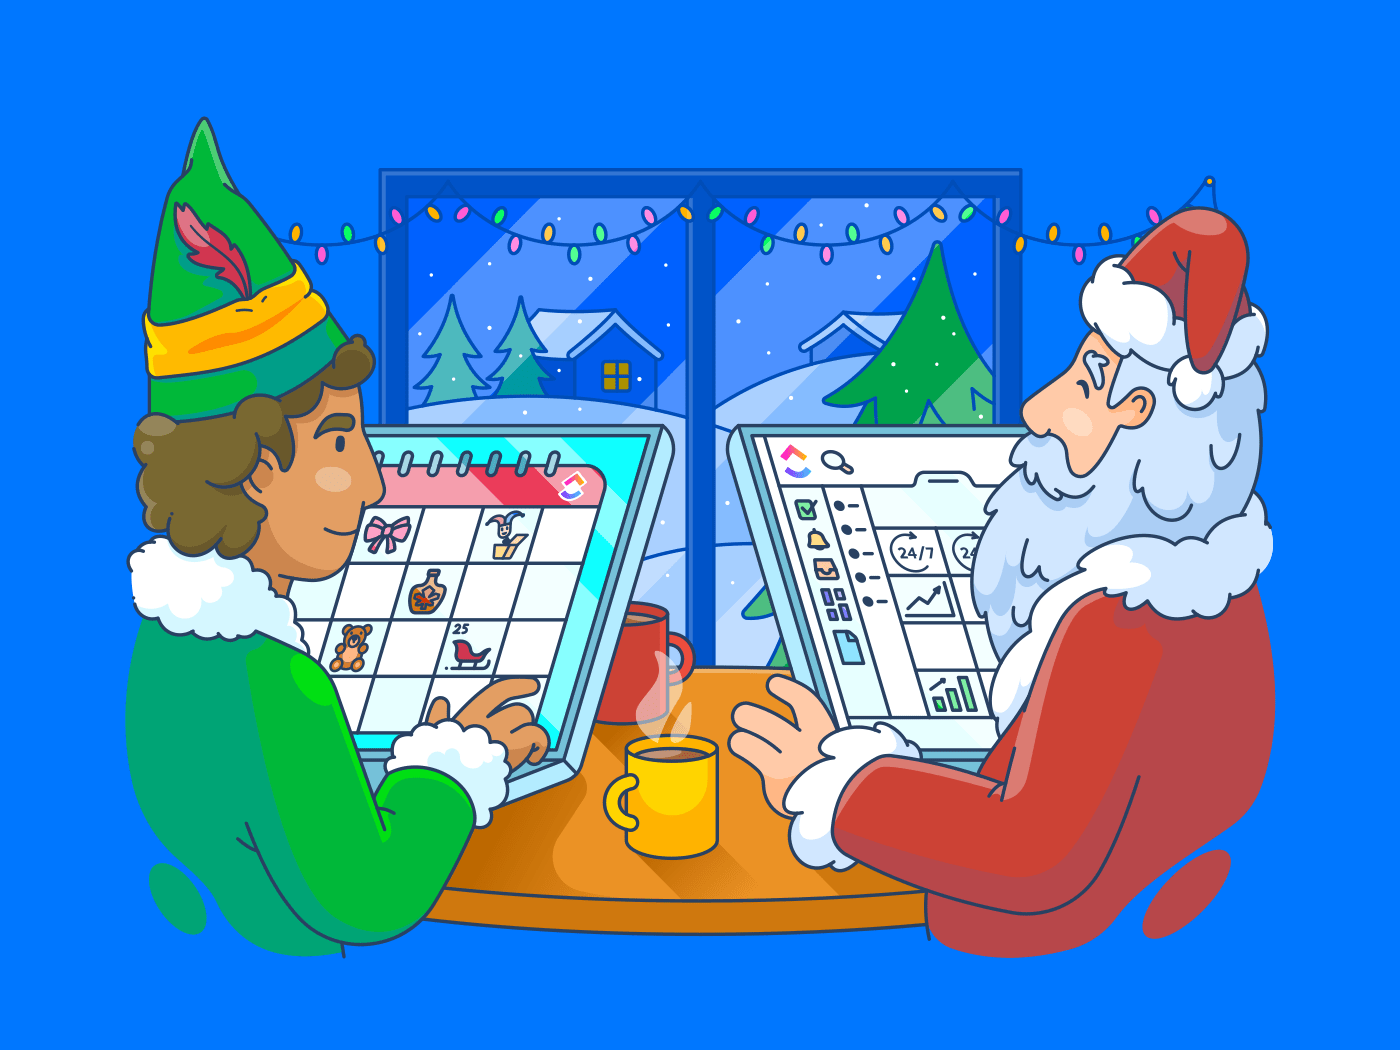 How to Optimize Your Workflow Over the Holidays